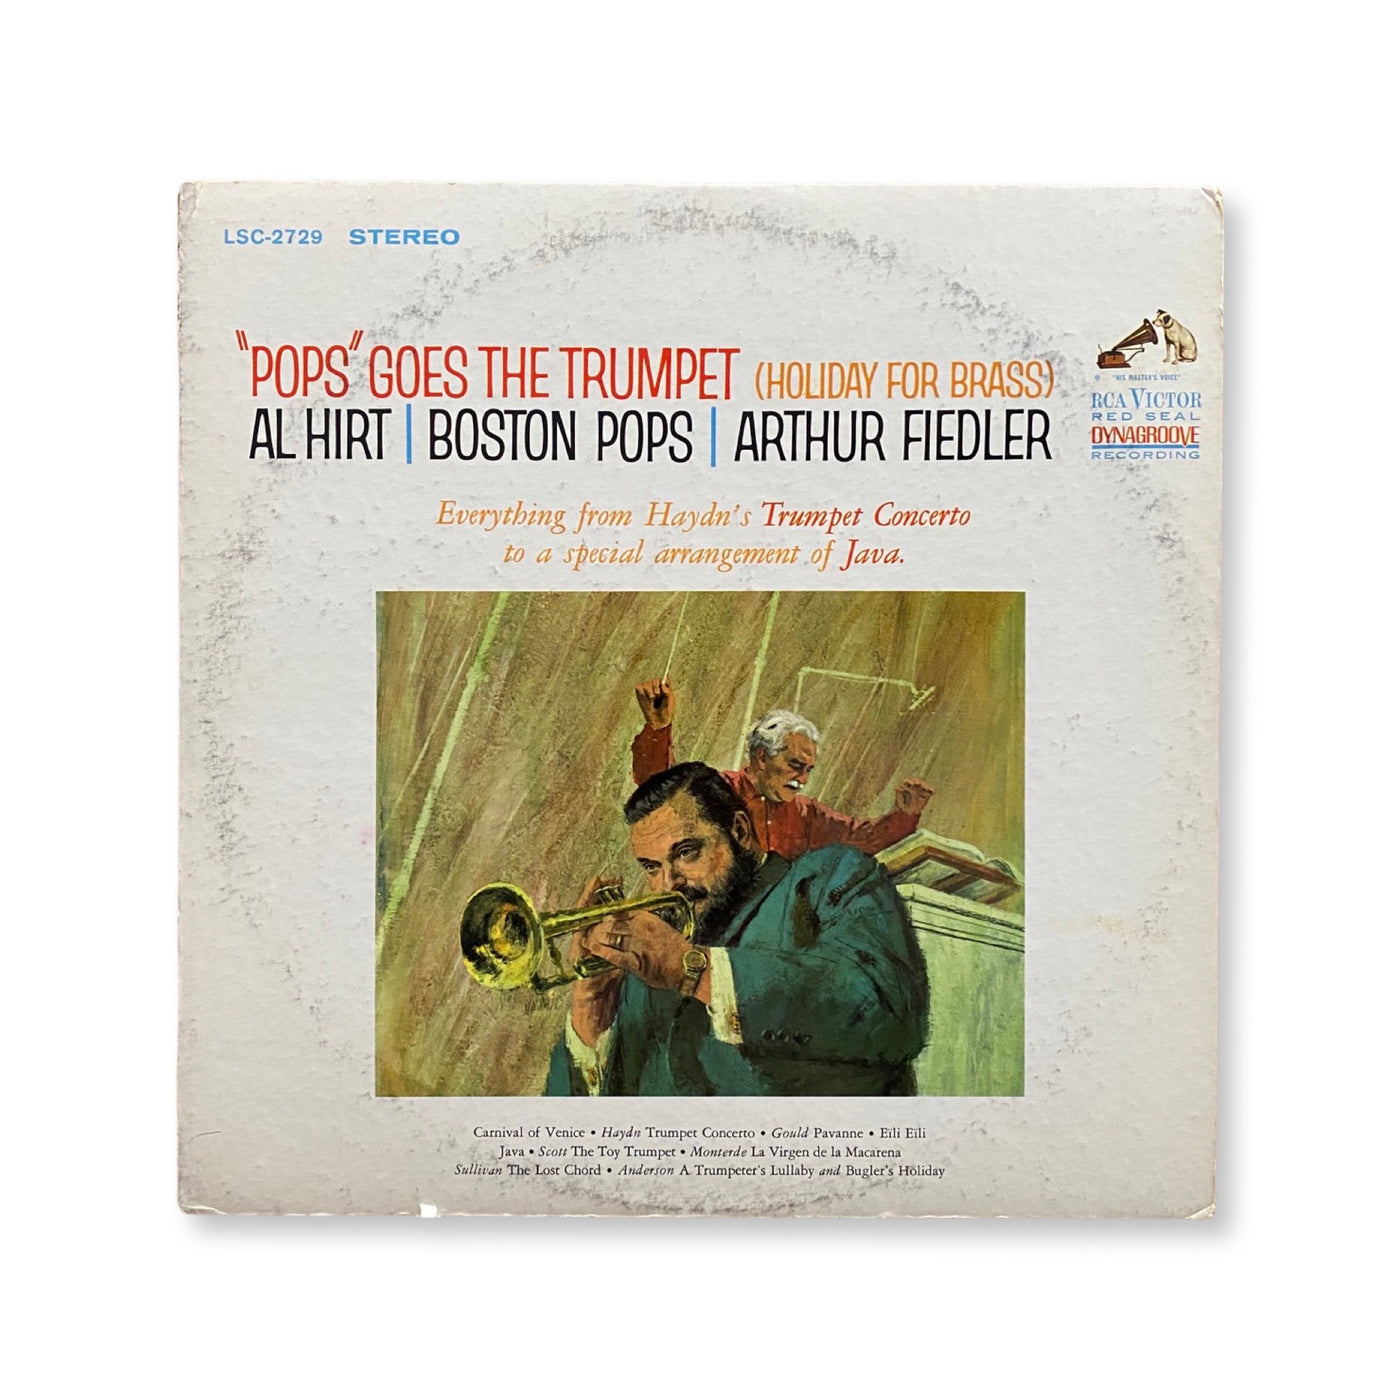 Al Hirt / The Boston Pops Orchestra / Arthur Fiedler - "Pops" Goes The Trumpet (Holiday For Brass)